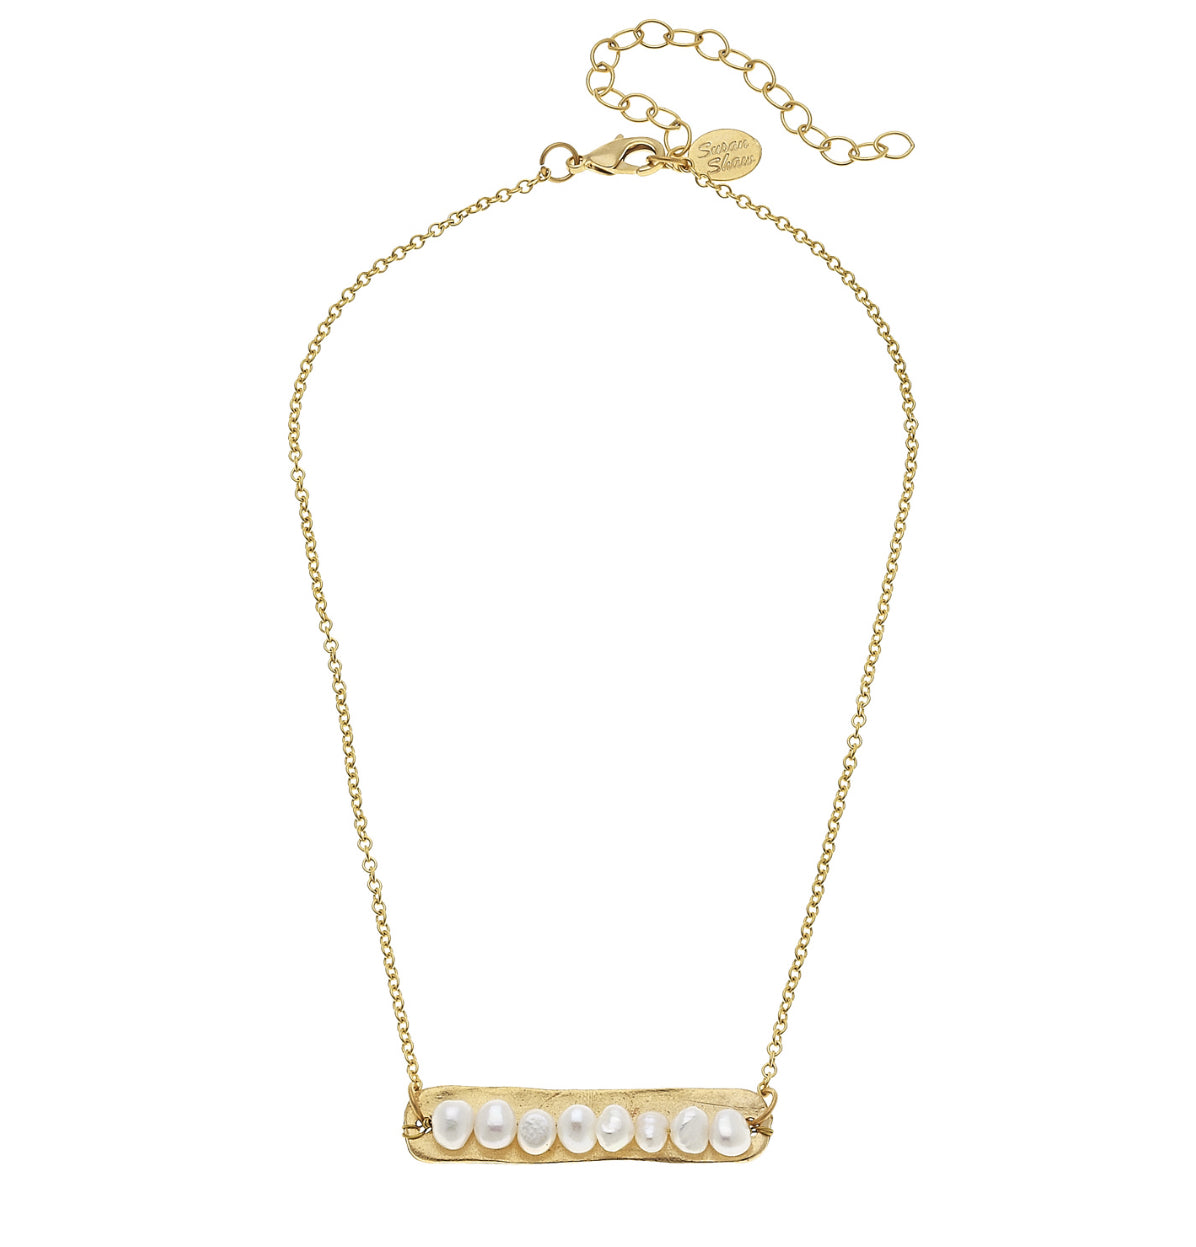 FRESHWATER PEARLS ON GOLD BAR NECKLACE